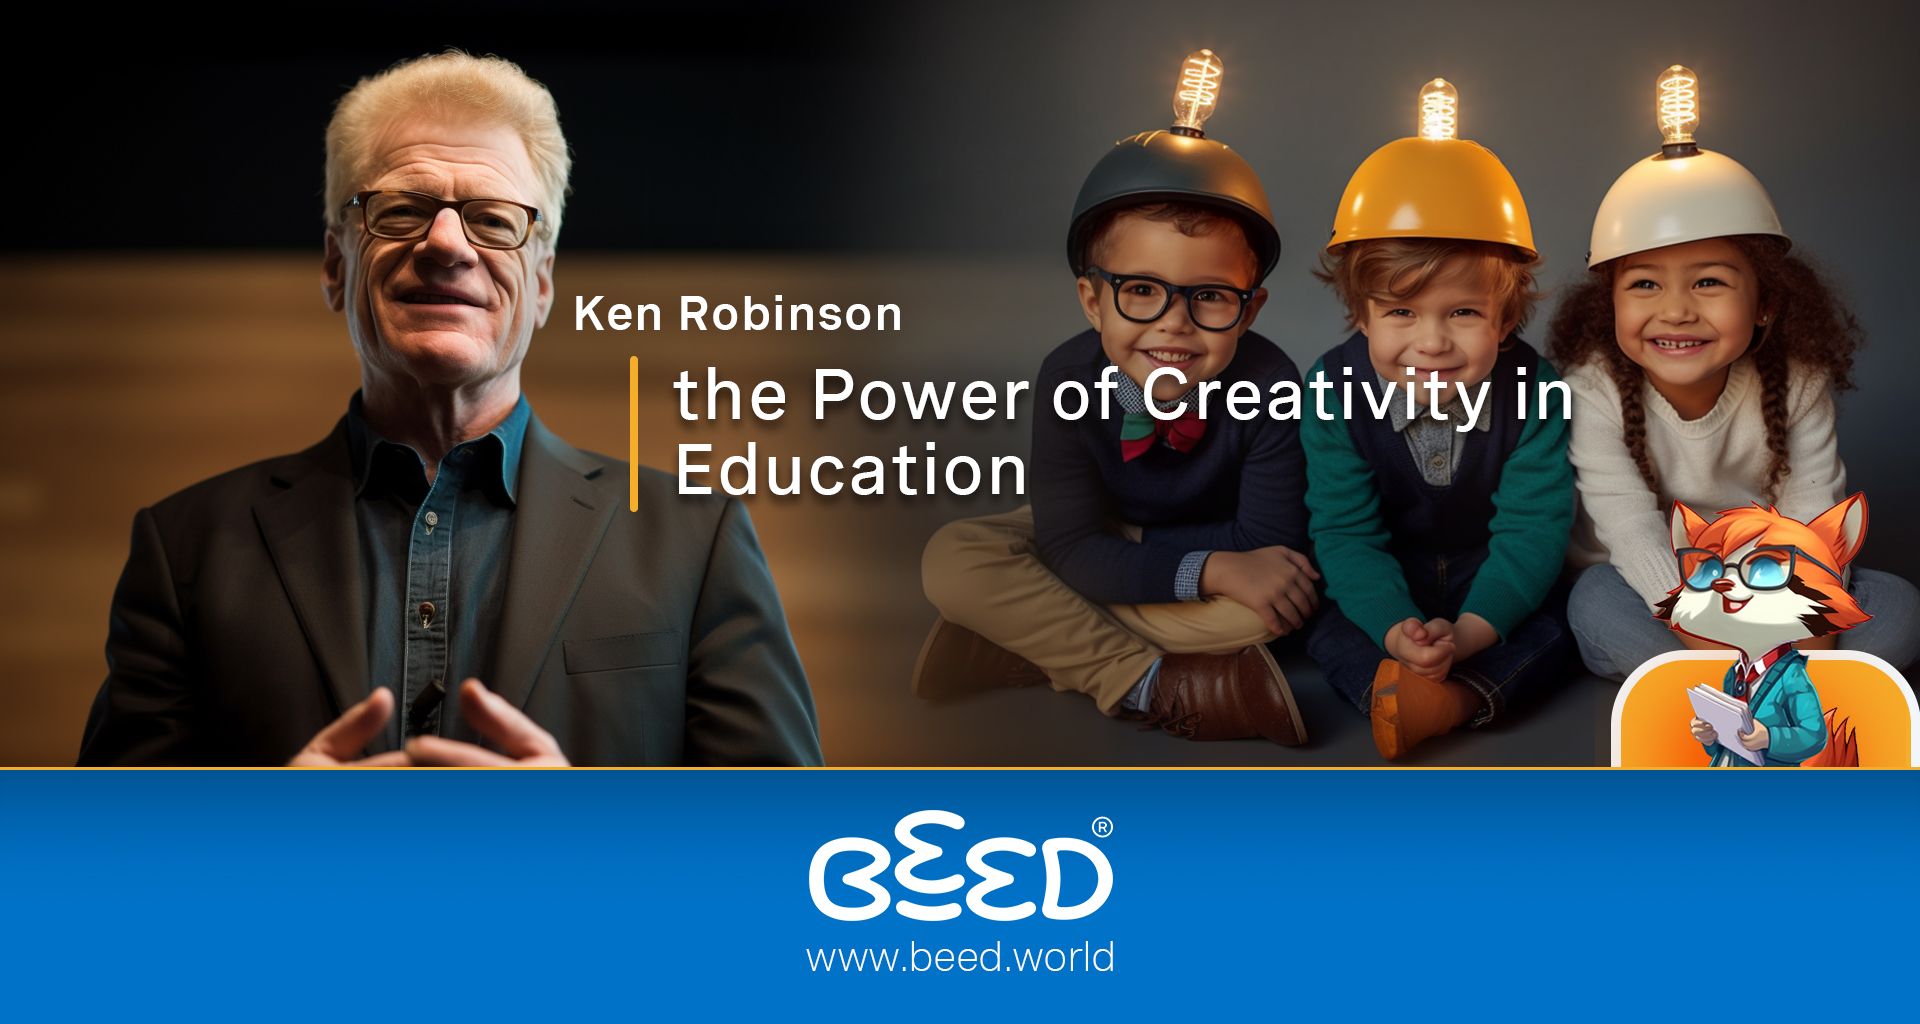 Ken Robinson and the Power of Creativity in Education